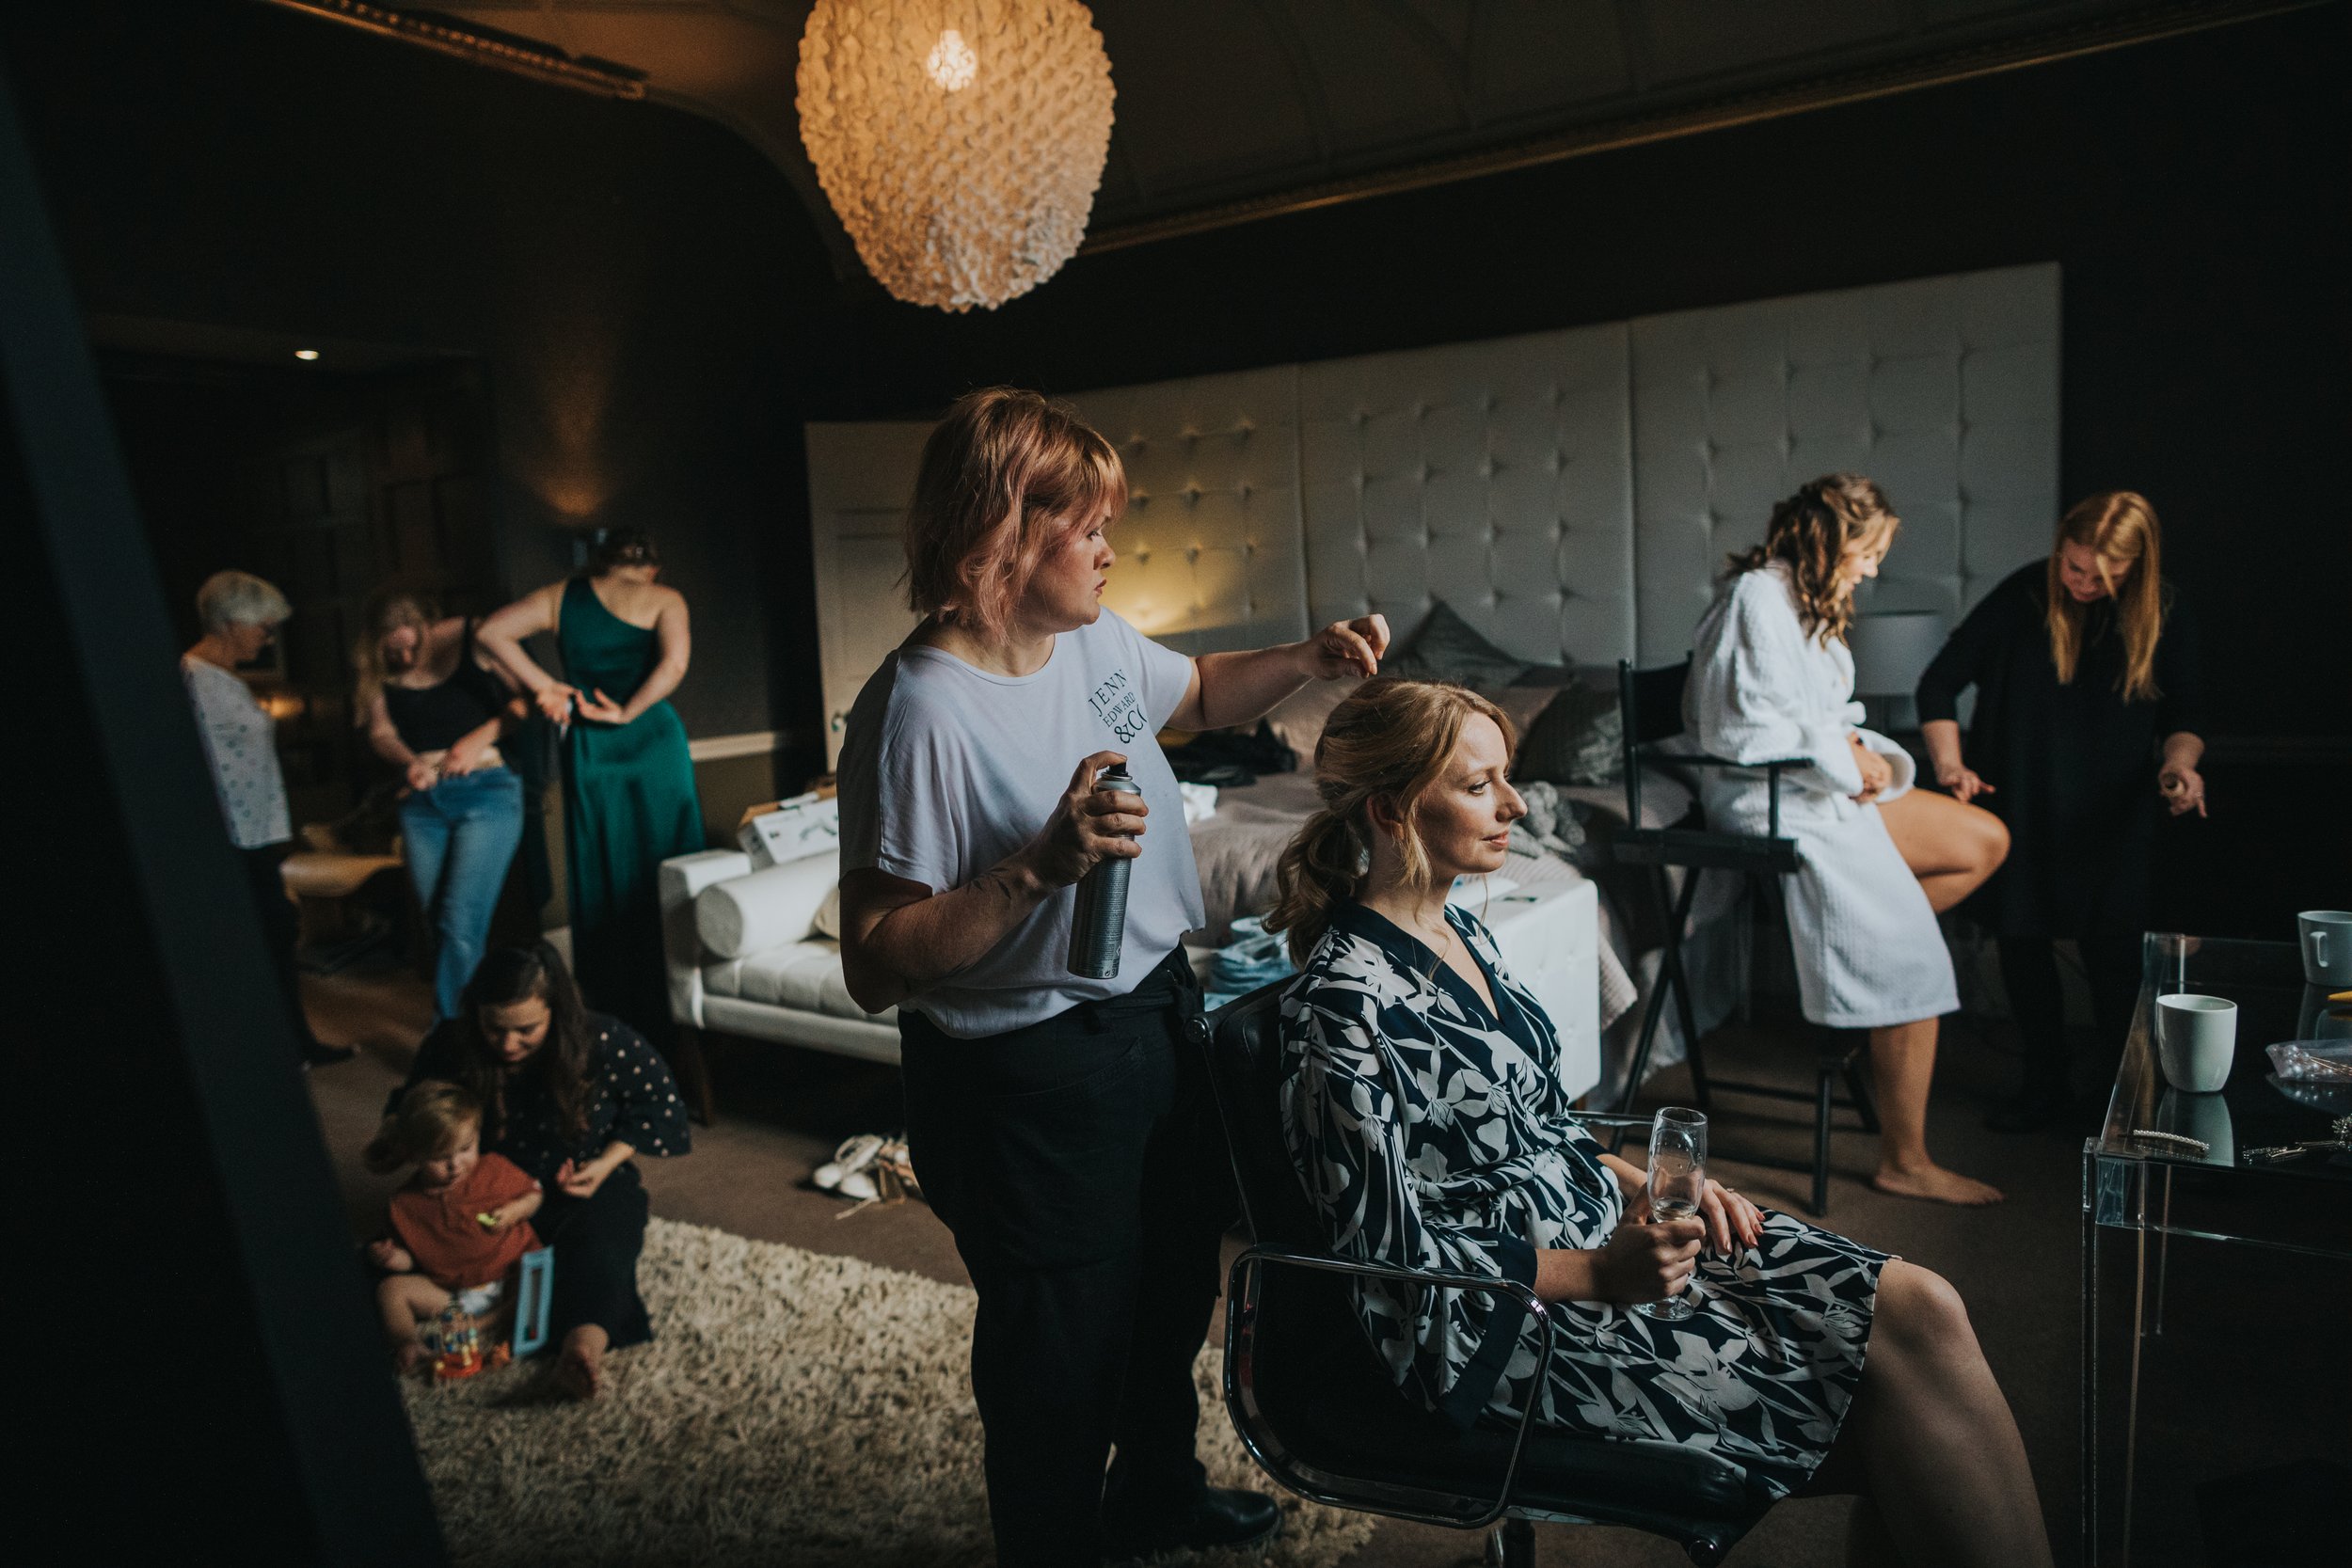 Bride has her hair done while bridesmaids get ready around her. 